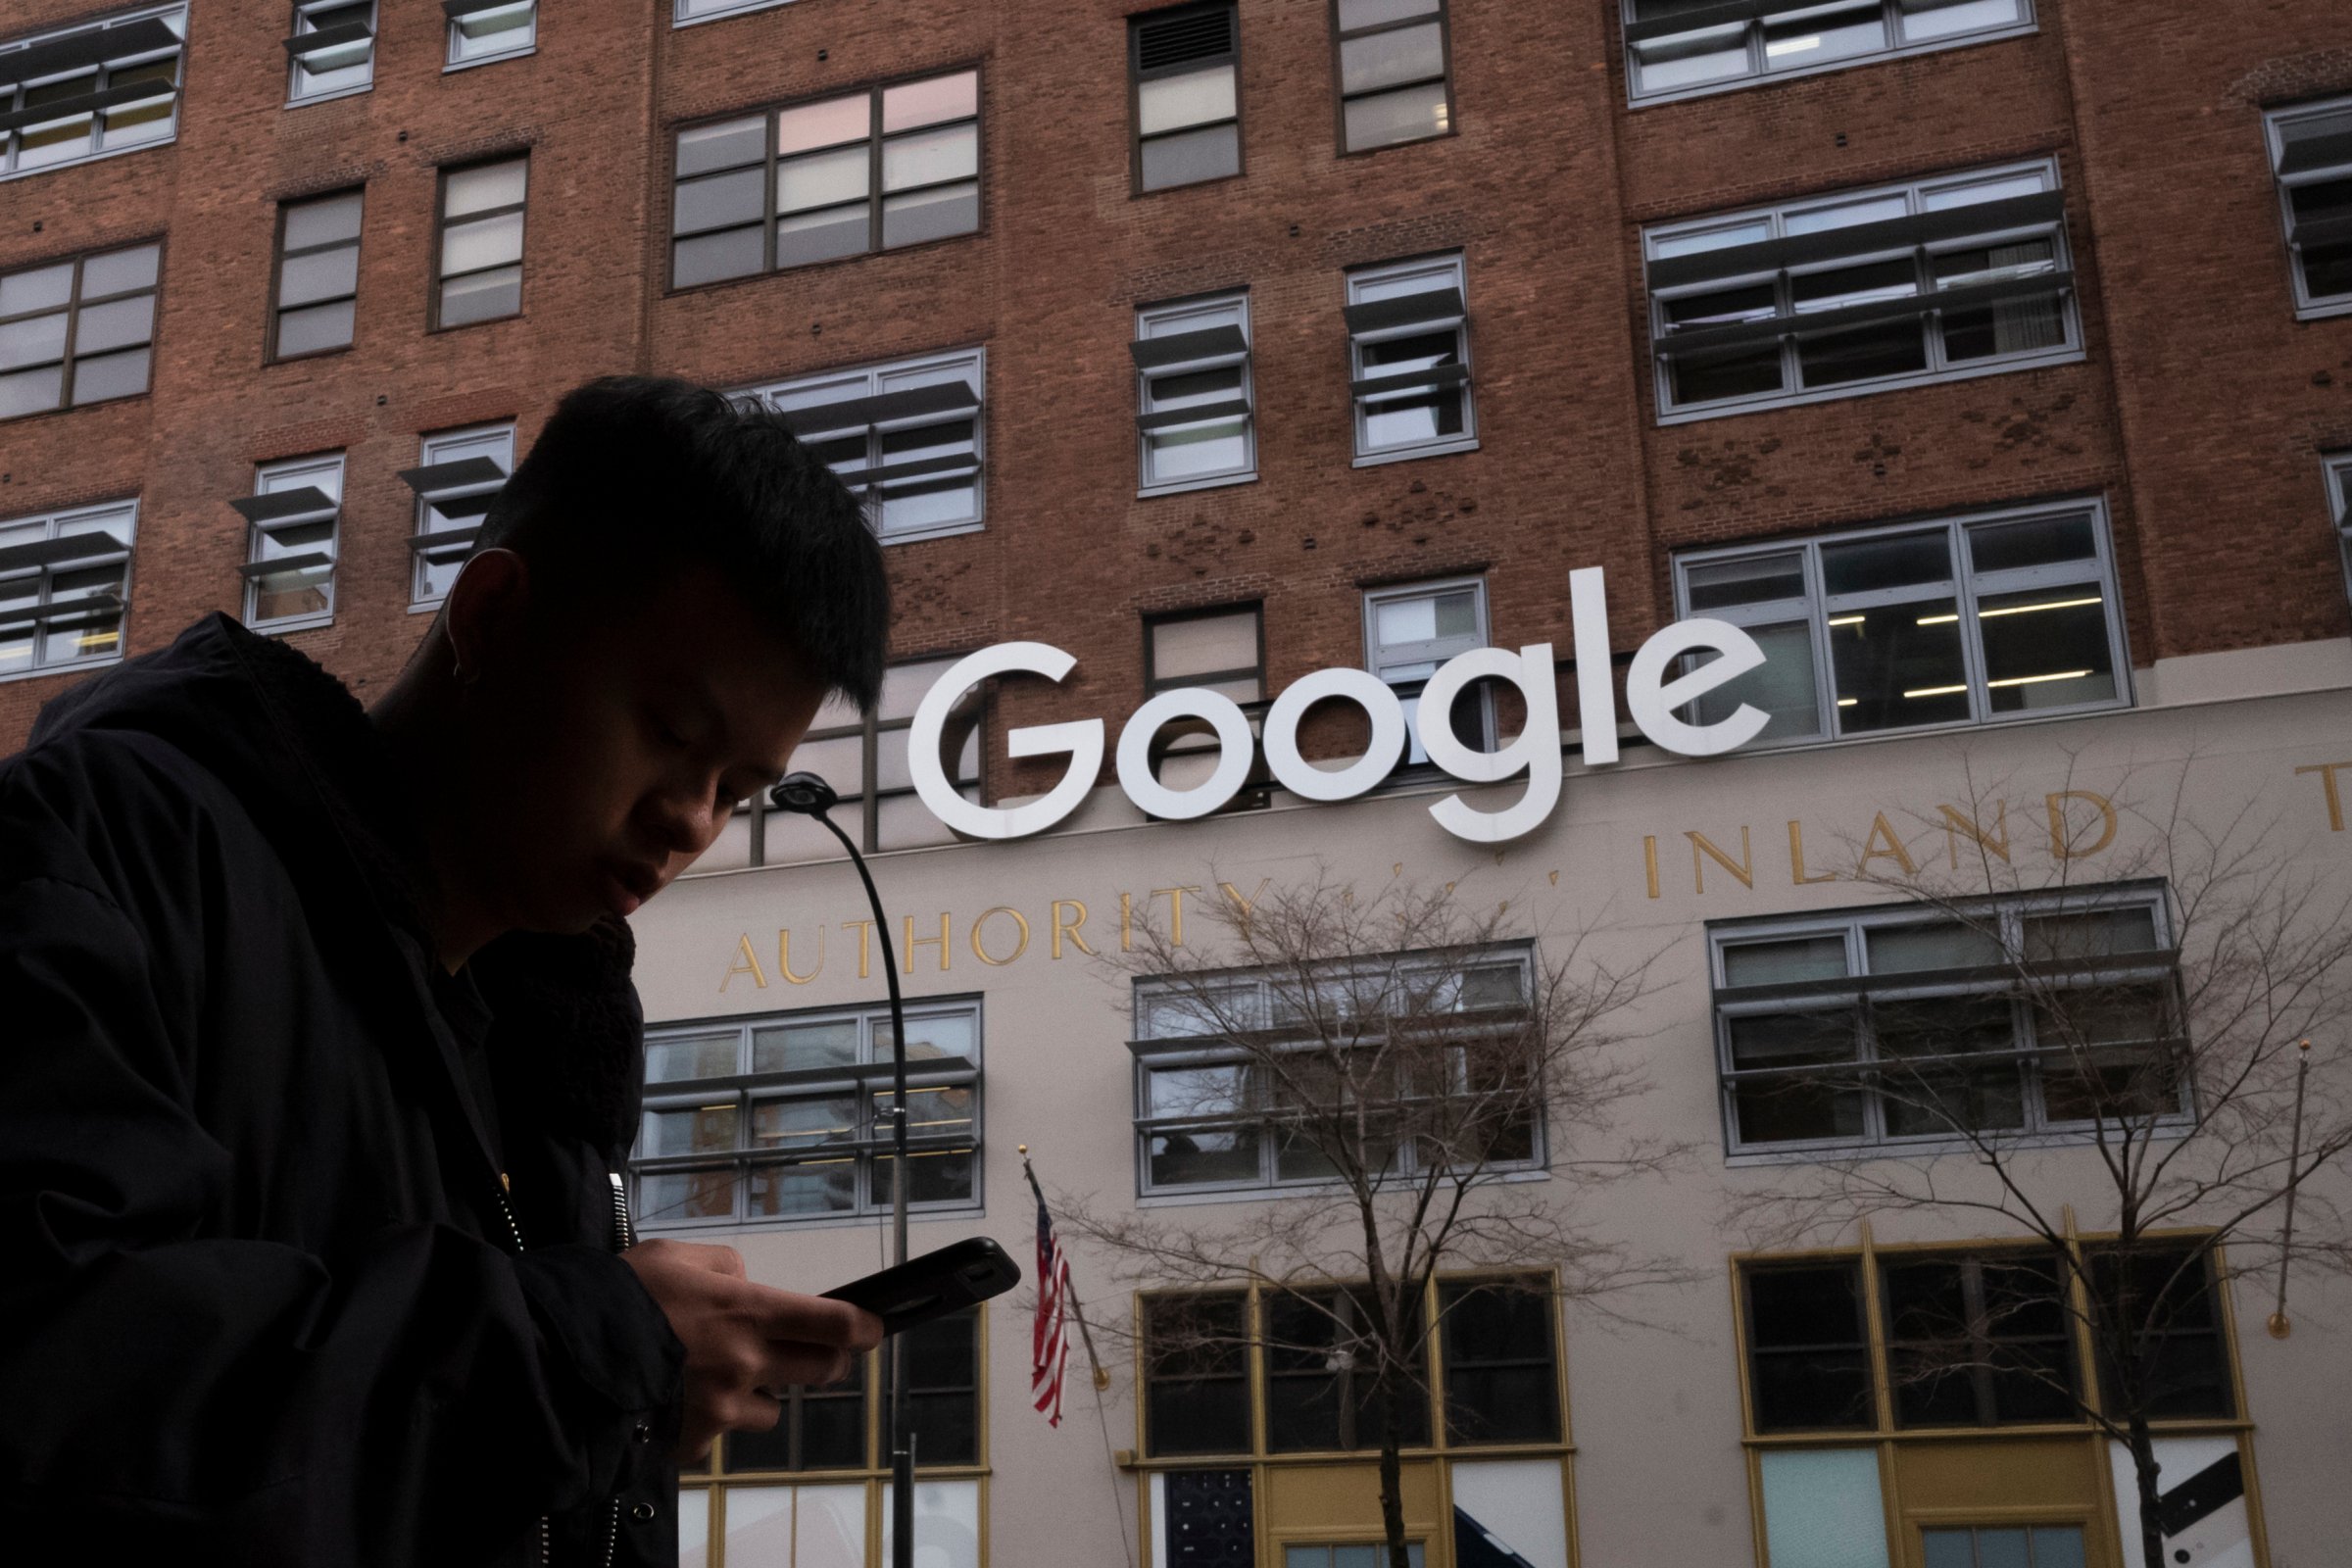 A man using a mobile phone walks past Google offices in New York